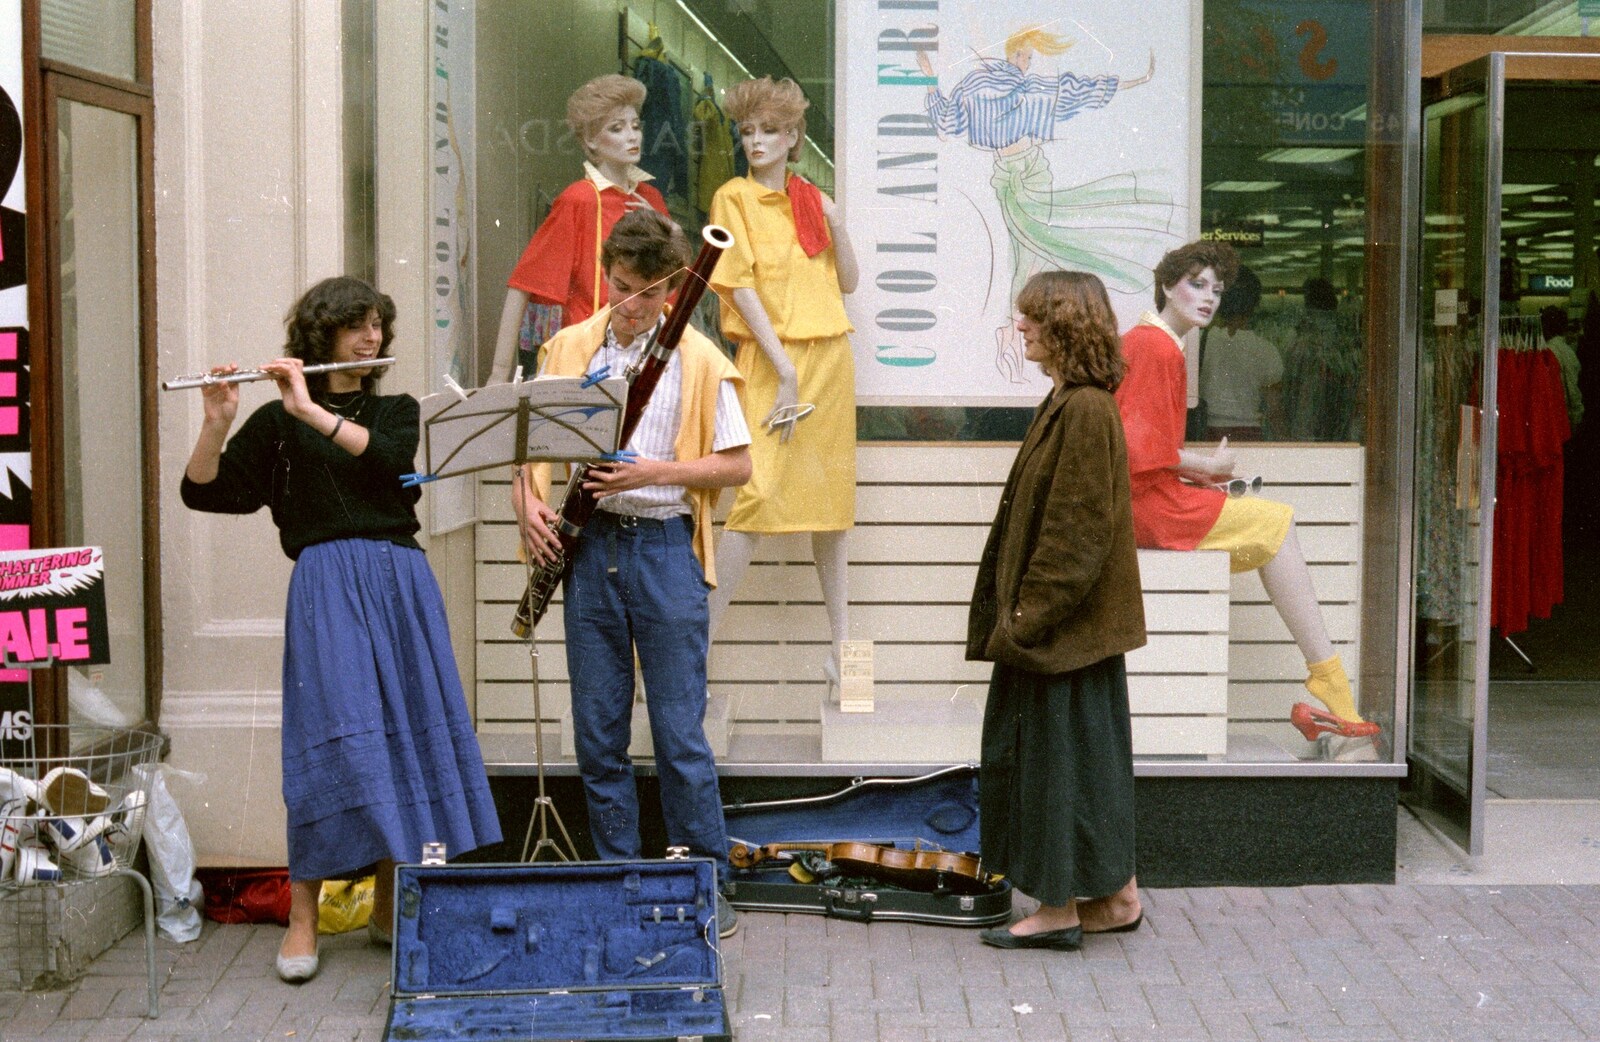 Bassoon busking outside Next from A Trip to Groombridge, Kent - 10th July 1986